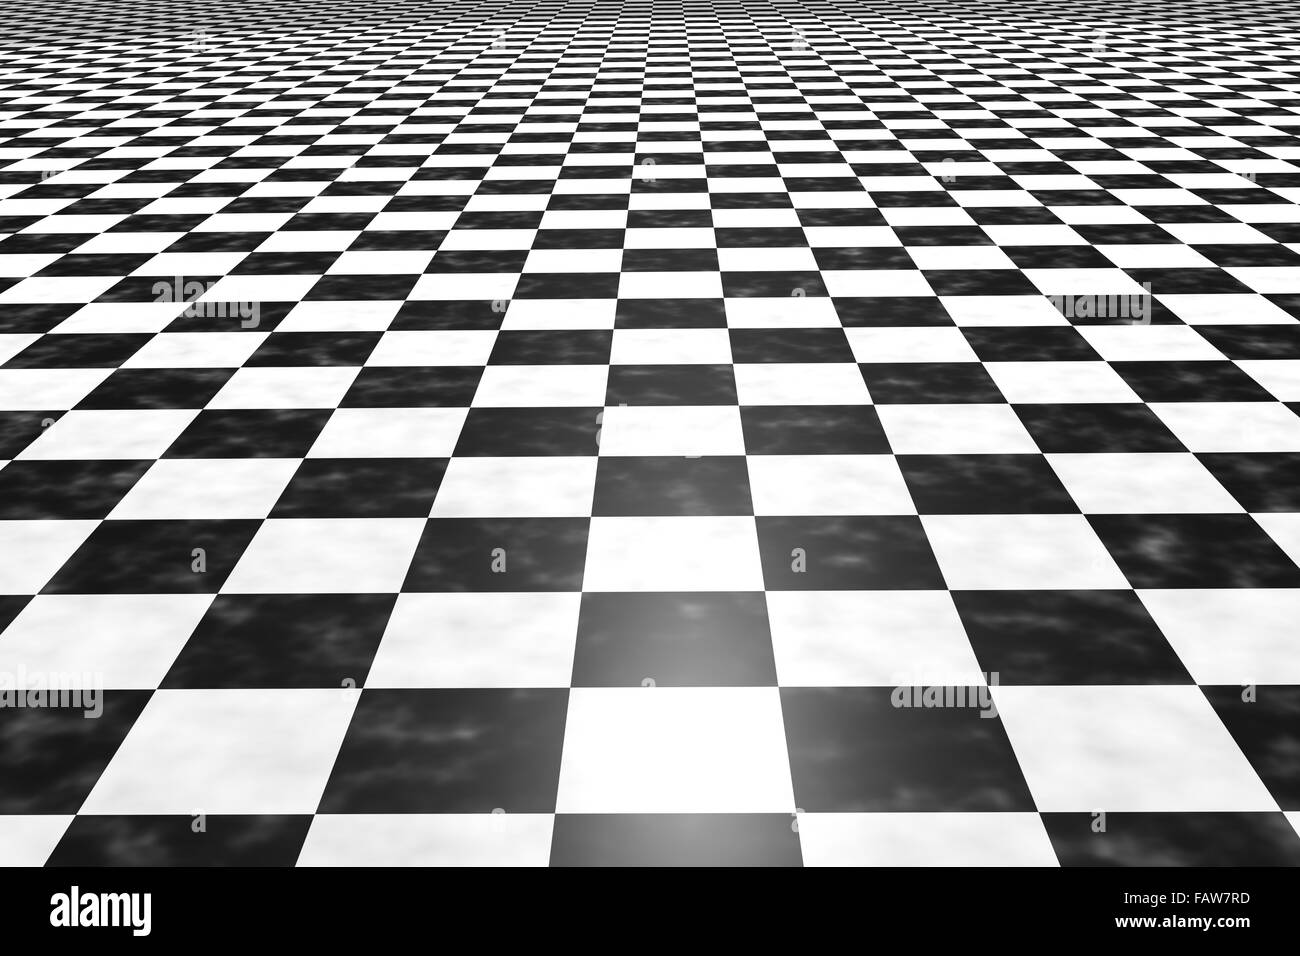 3d rendering of a square black and white tiles floor Stock Photo